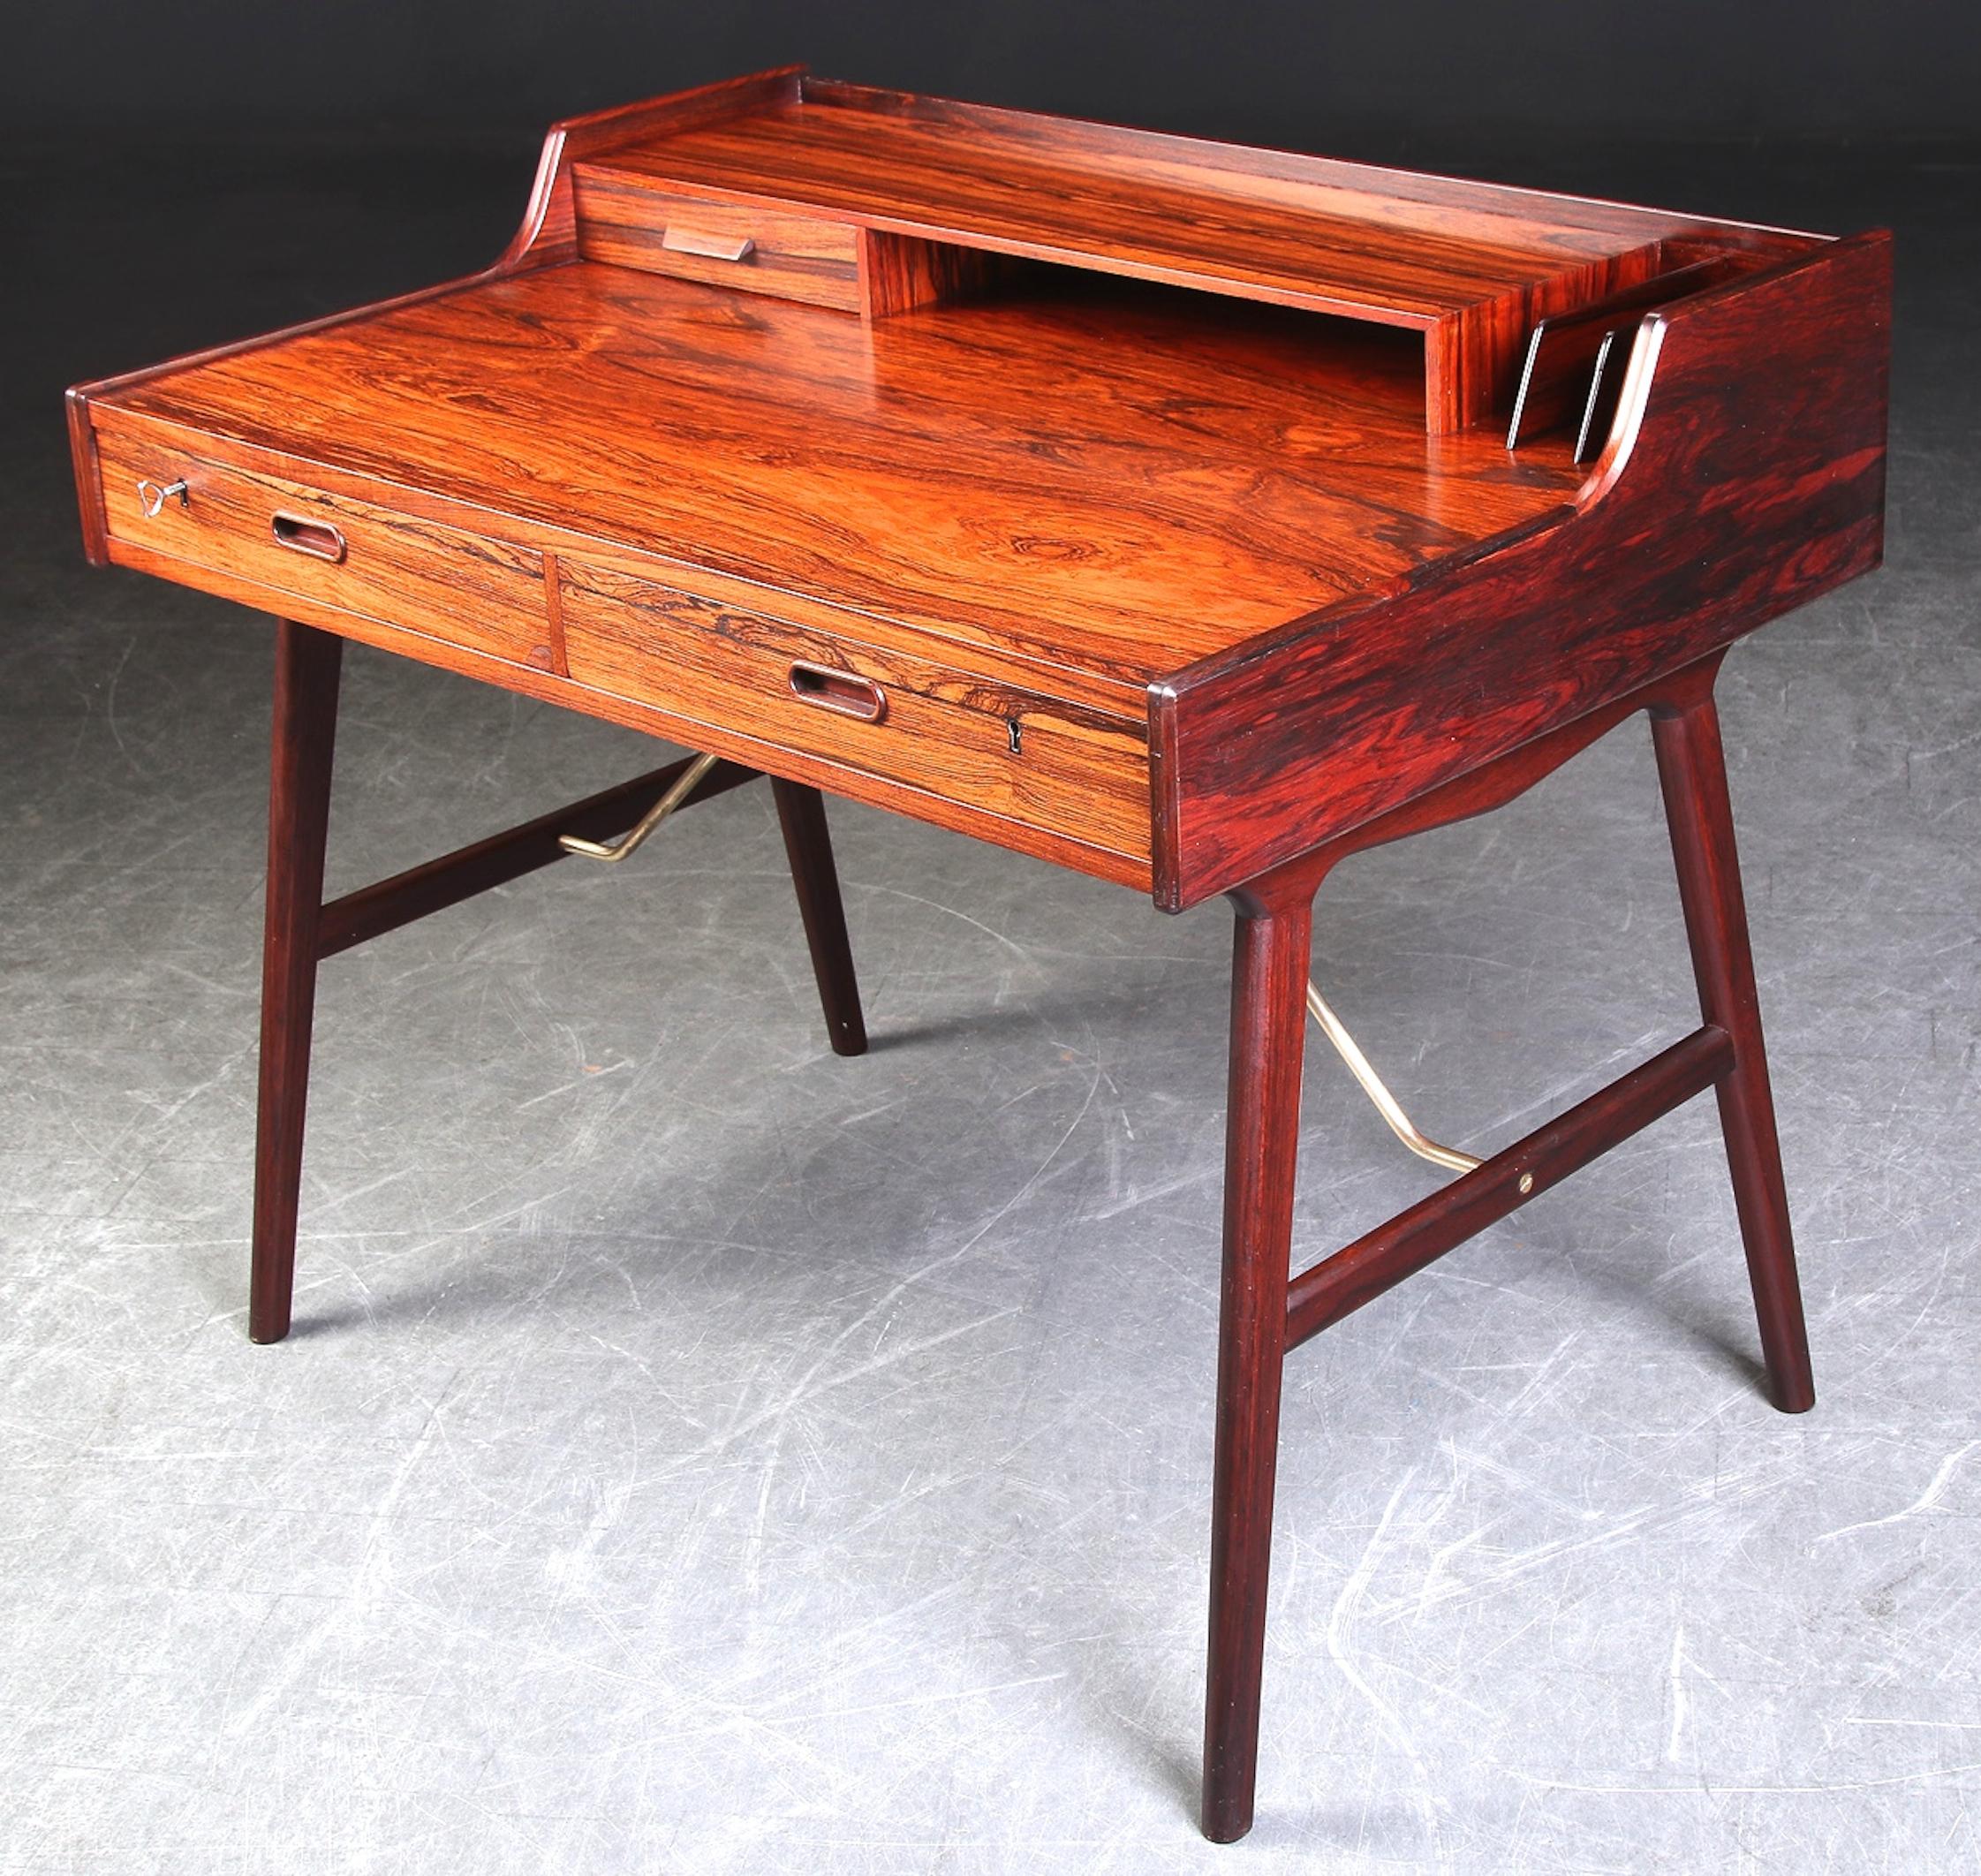 A desk in rosewood veneer designed by Arne W. Iversen and edited by Vinde Mobelfabrik in the 1970s.Top with drawer; compartiment and letter sortens, front with two drawers; tramsons in brass. Key included. Stamped with ink stain on the underside.